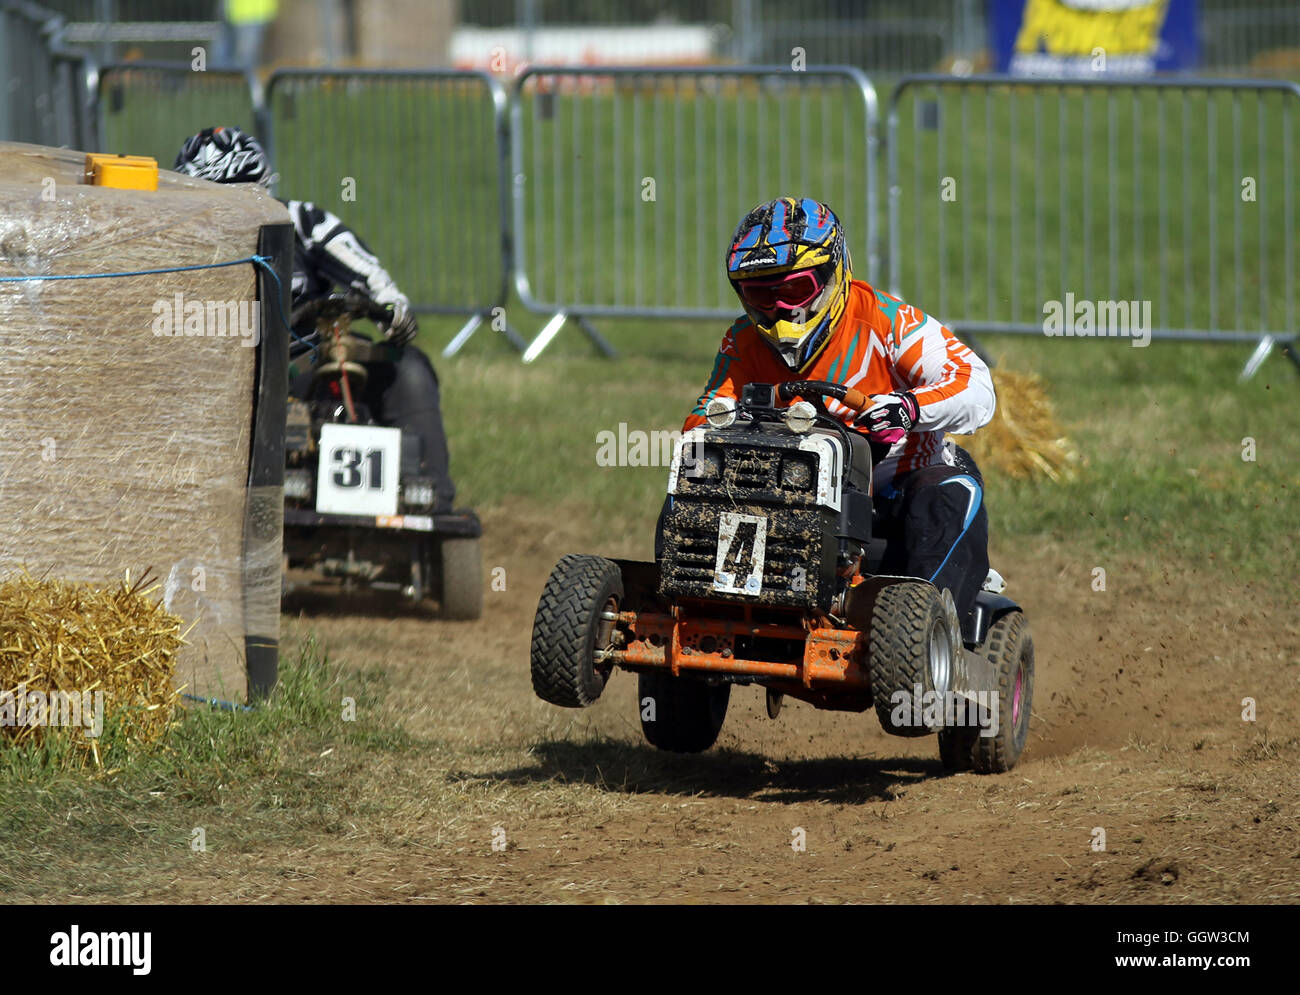 Teams qualify ahead of the 12 hour lawn mower race - which commences at 8pm - at Five Oaks, West Sussex. Stock Photo